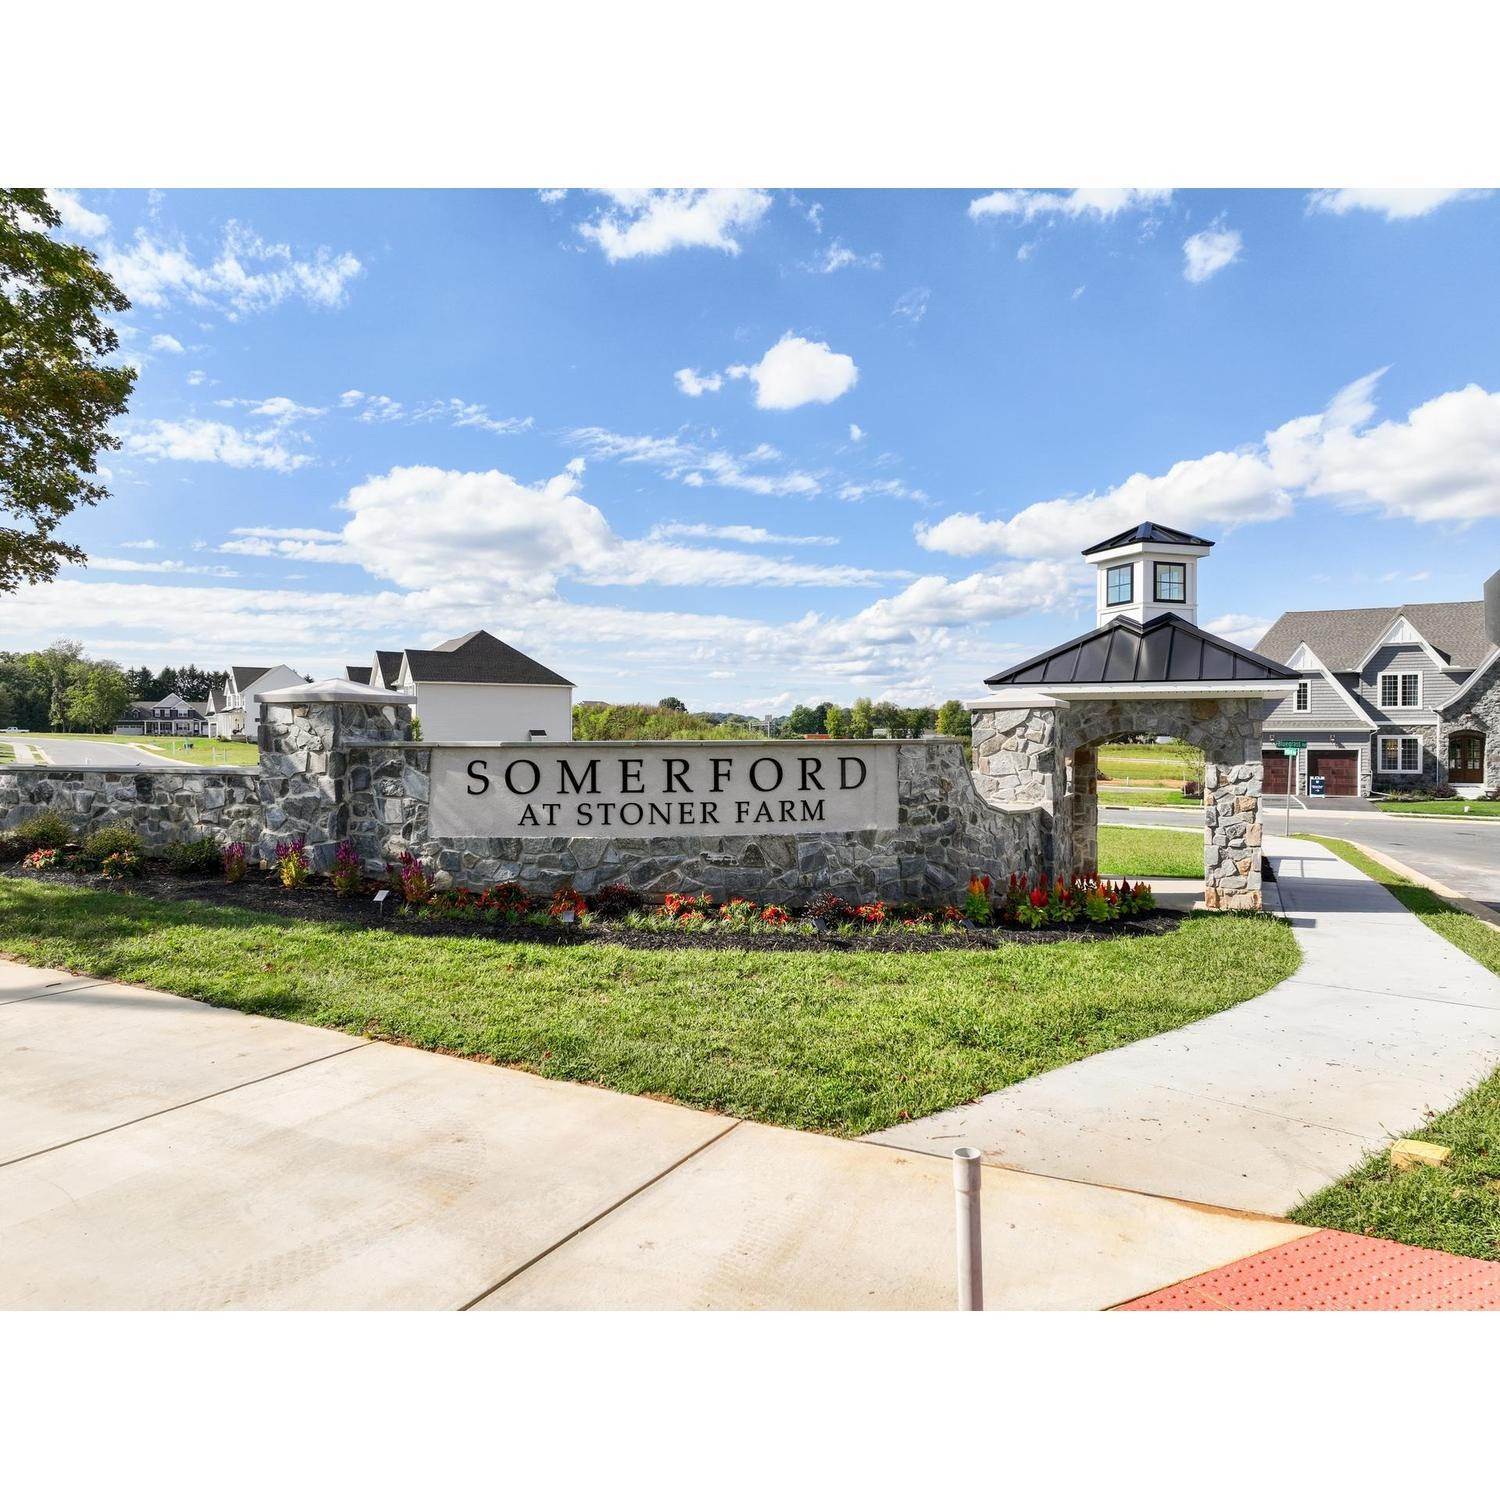 3. 1301 Eden Rd, Lancaster, PA 17601에 Somerford at Stoner Farm Carriage Homes 건물